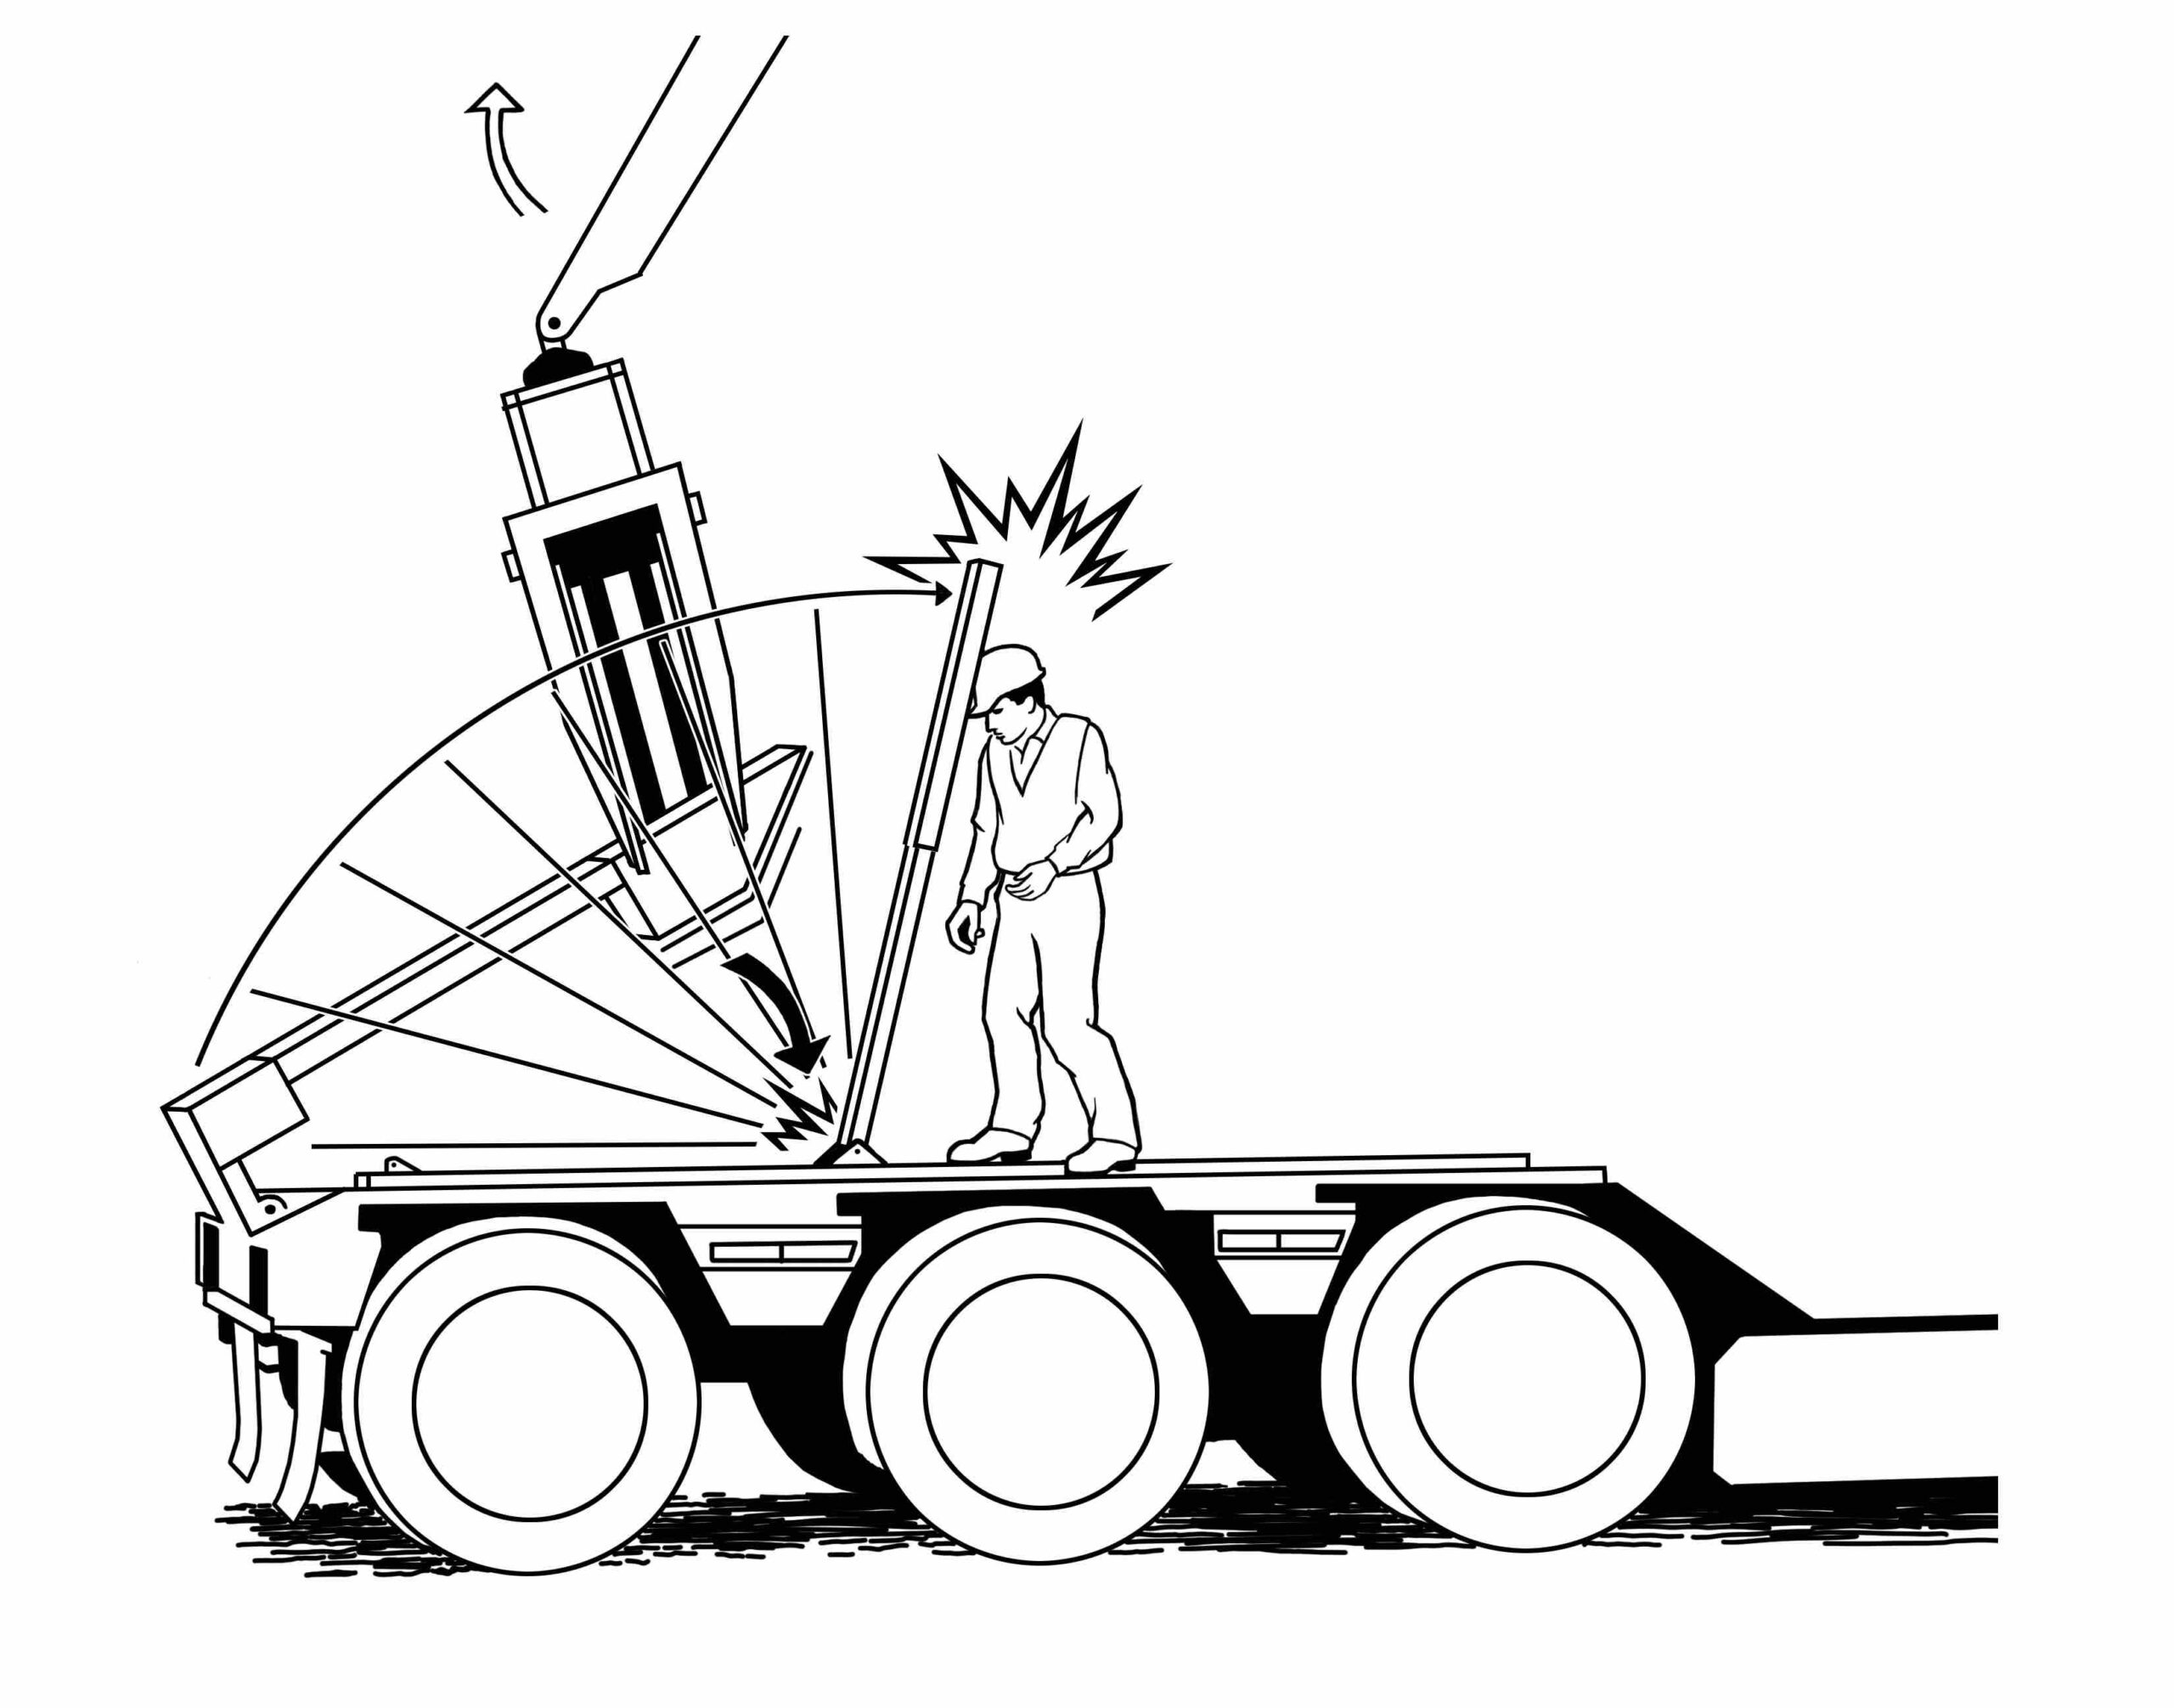 SA-Lowboy-Operator-Struck-by-Boom-Stand-Support-Arm-iillustration